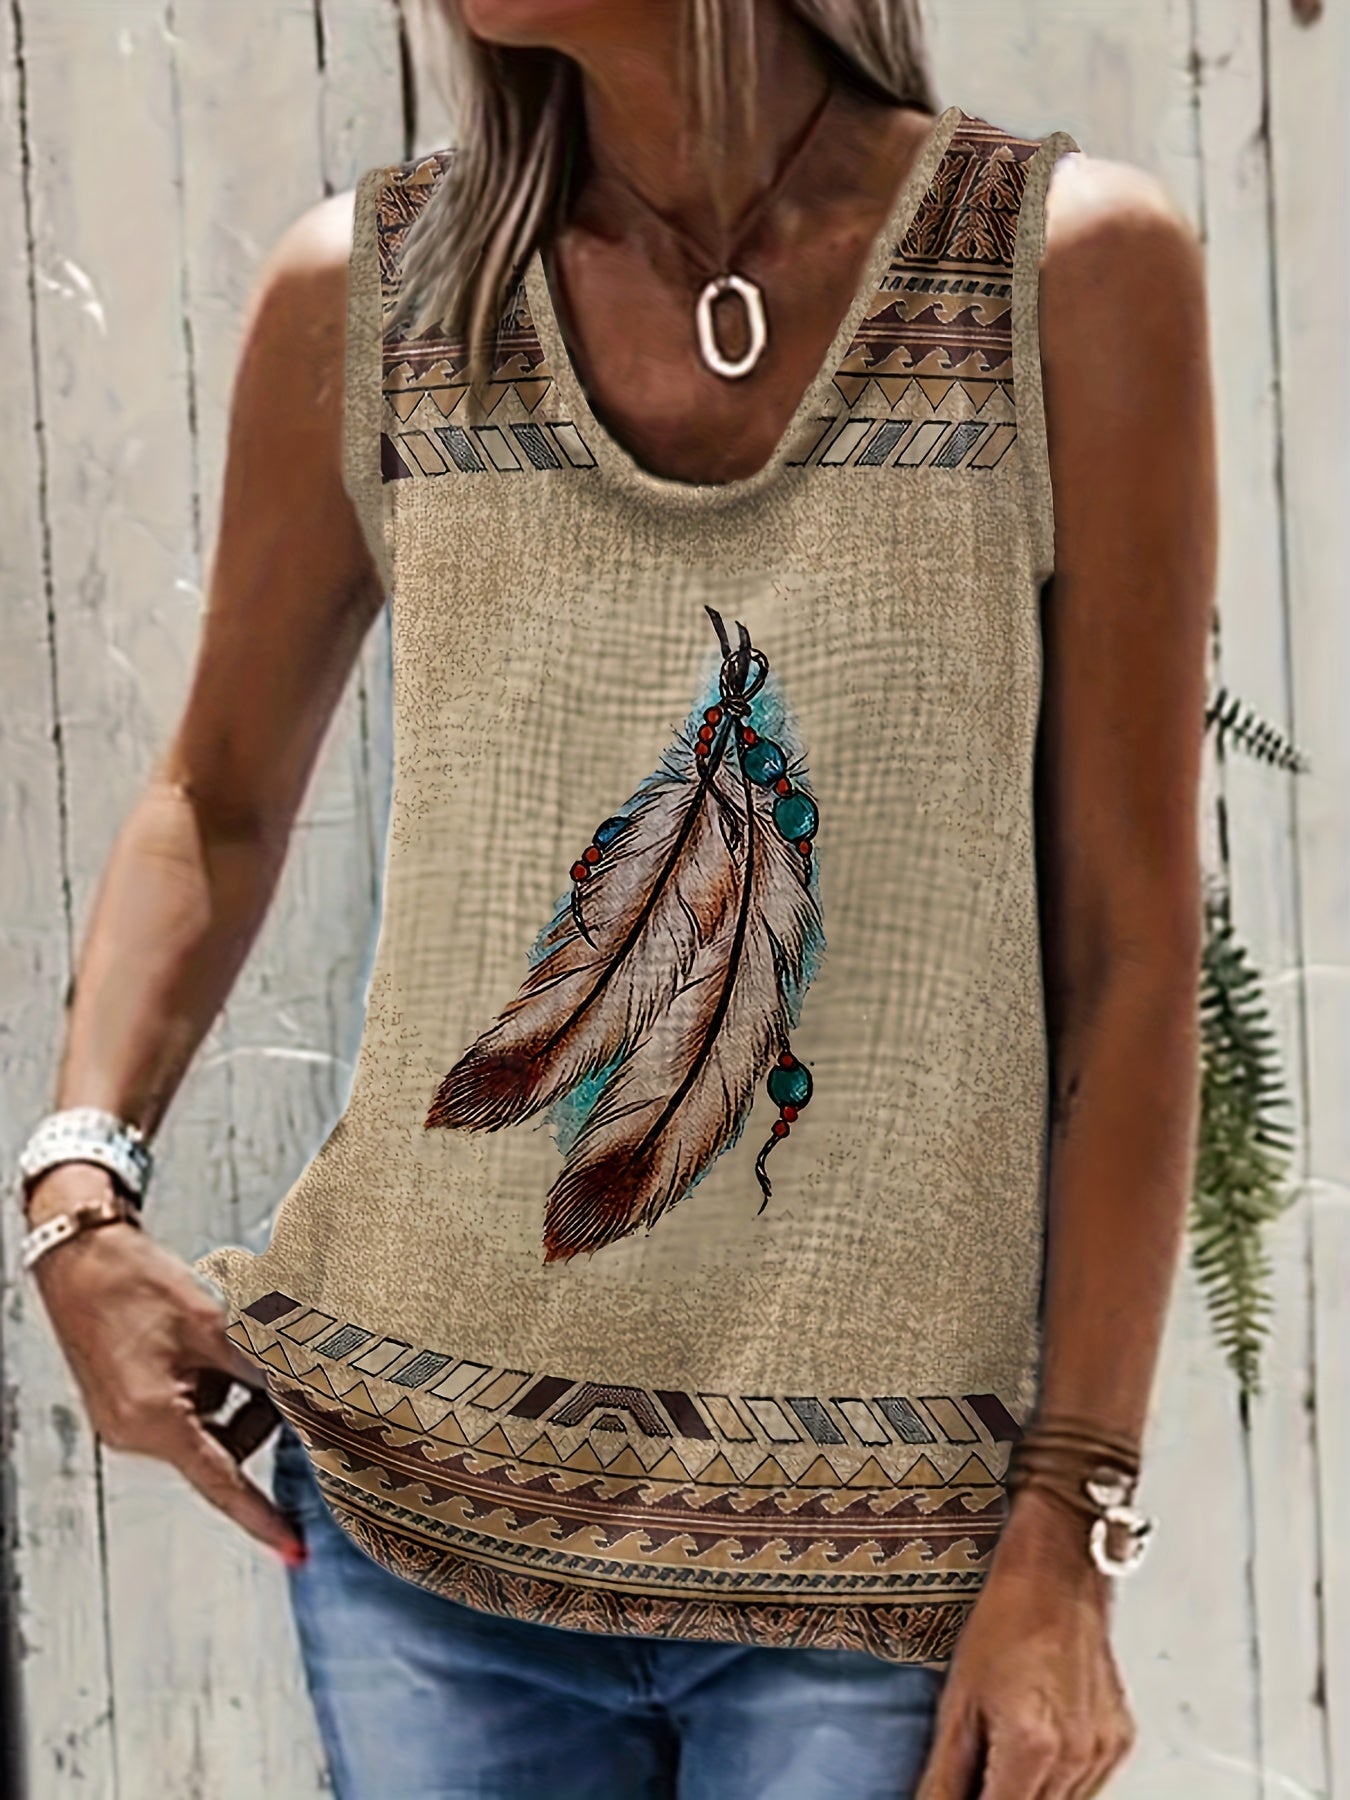 Vzyzv Summer Tank Top: Feather Print + Ethnic Style + Casual Wear for Women